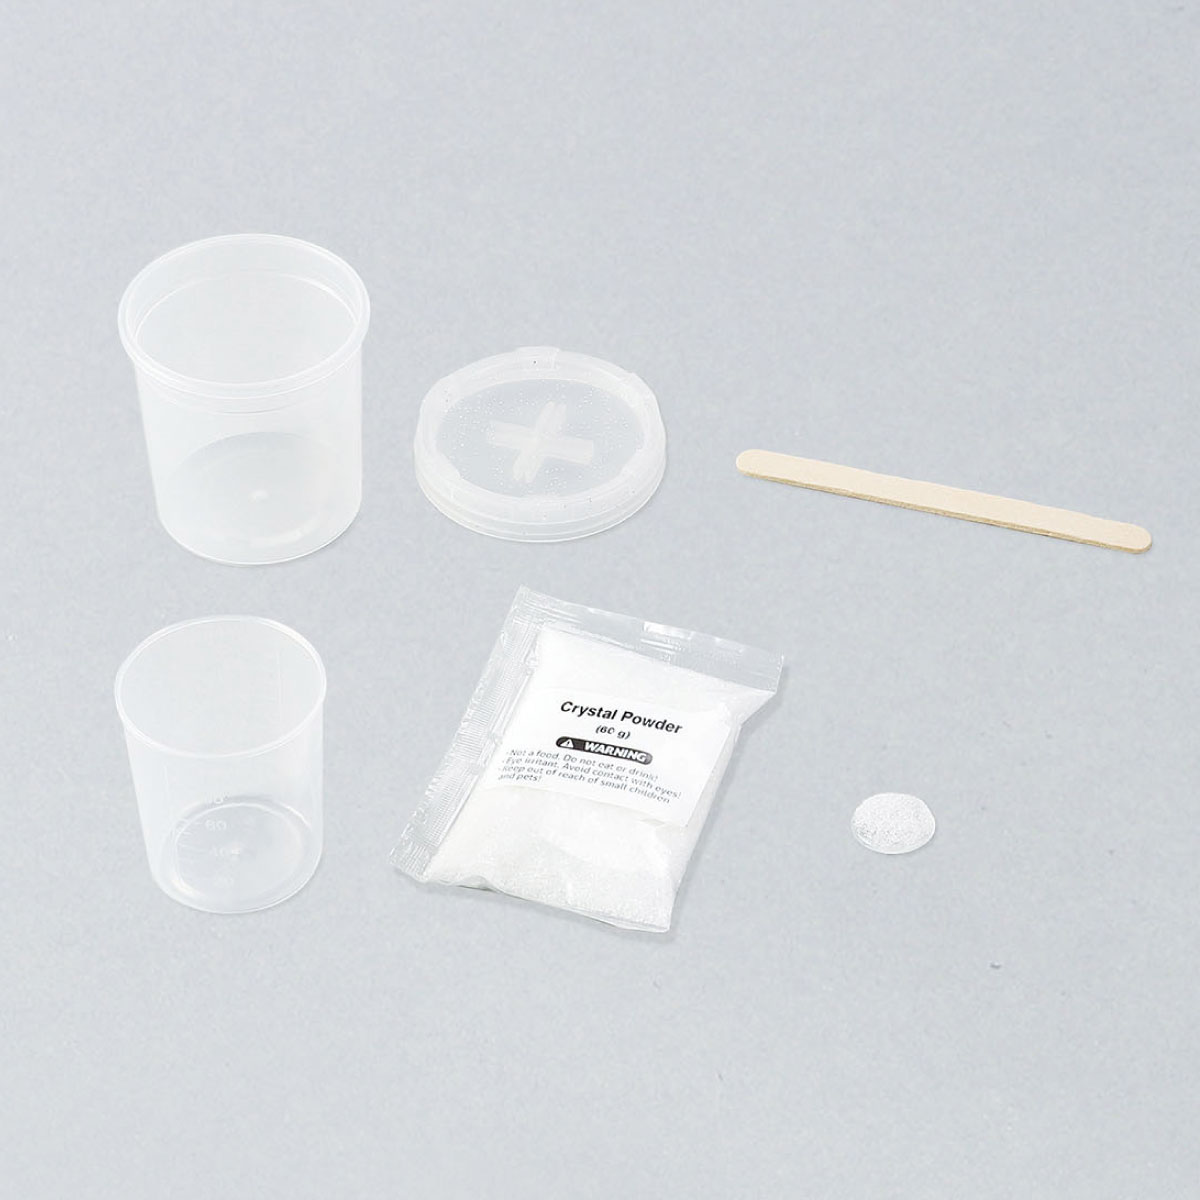 a- Tec crystal crystal rearing kit construction kit construction rearing free research free construction summer vacation winter day off child Kids family Family crystal crystal 